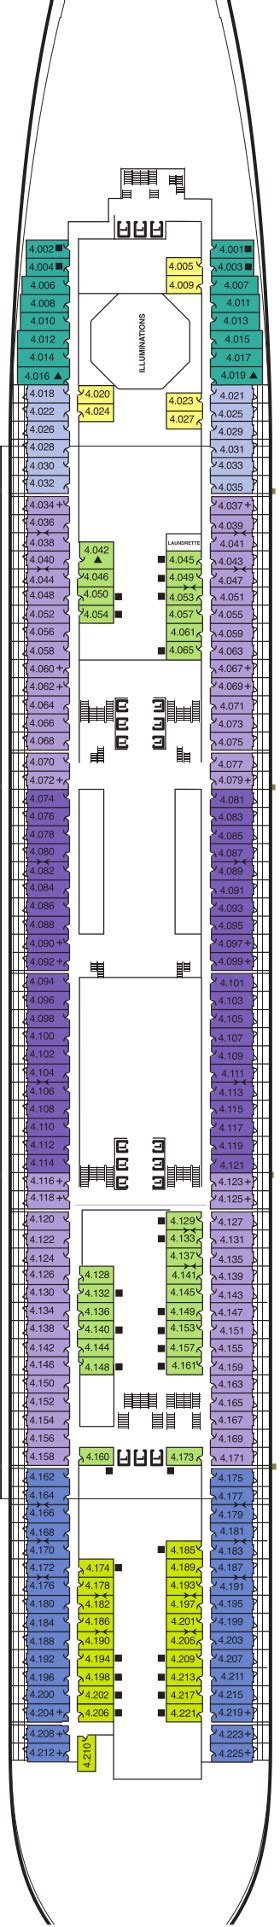 queen mary 2 deck plan 4